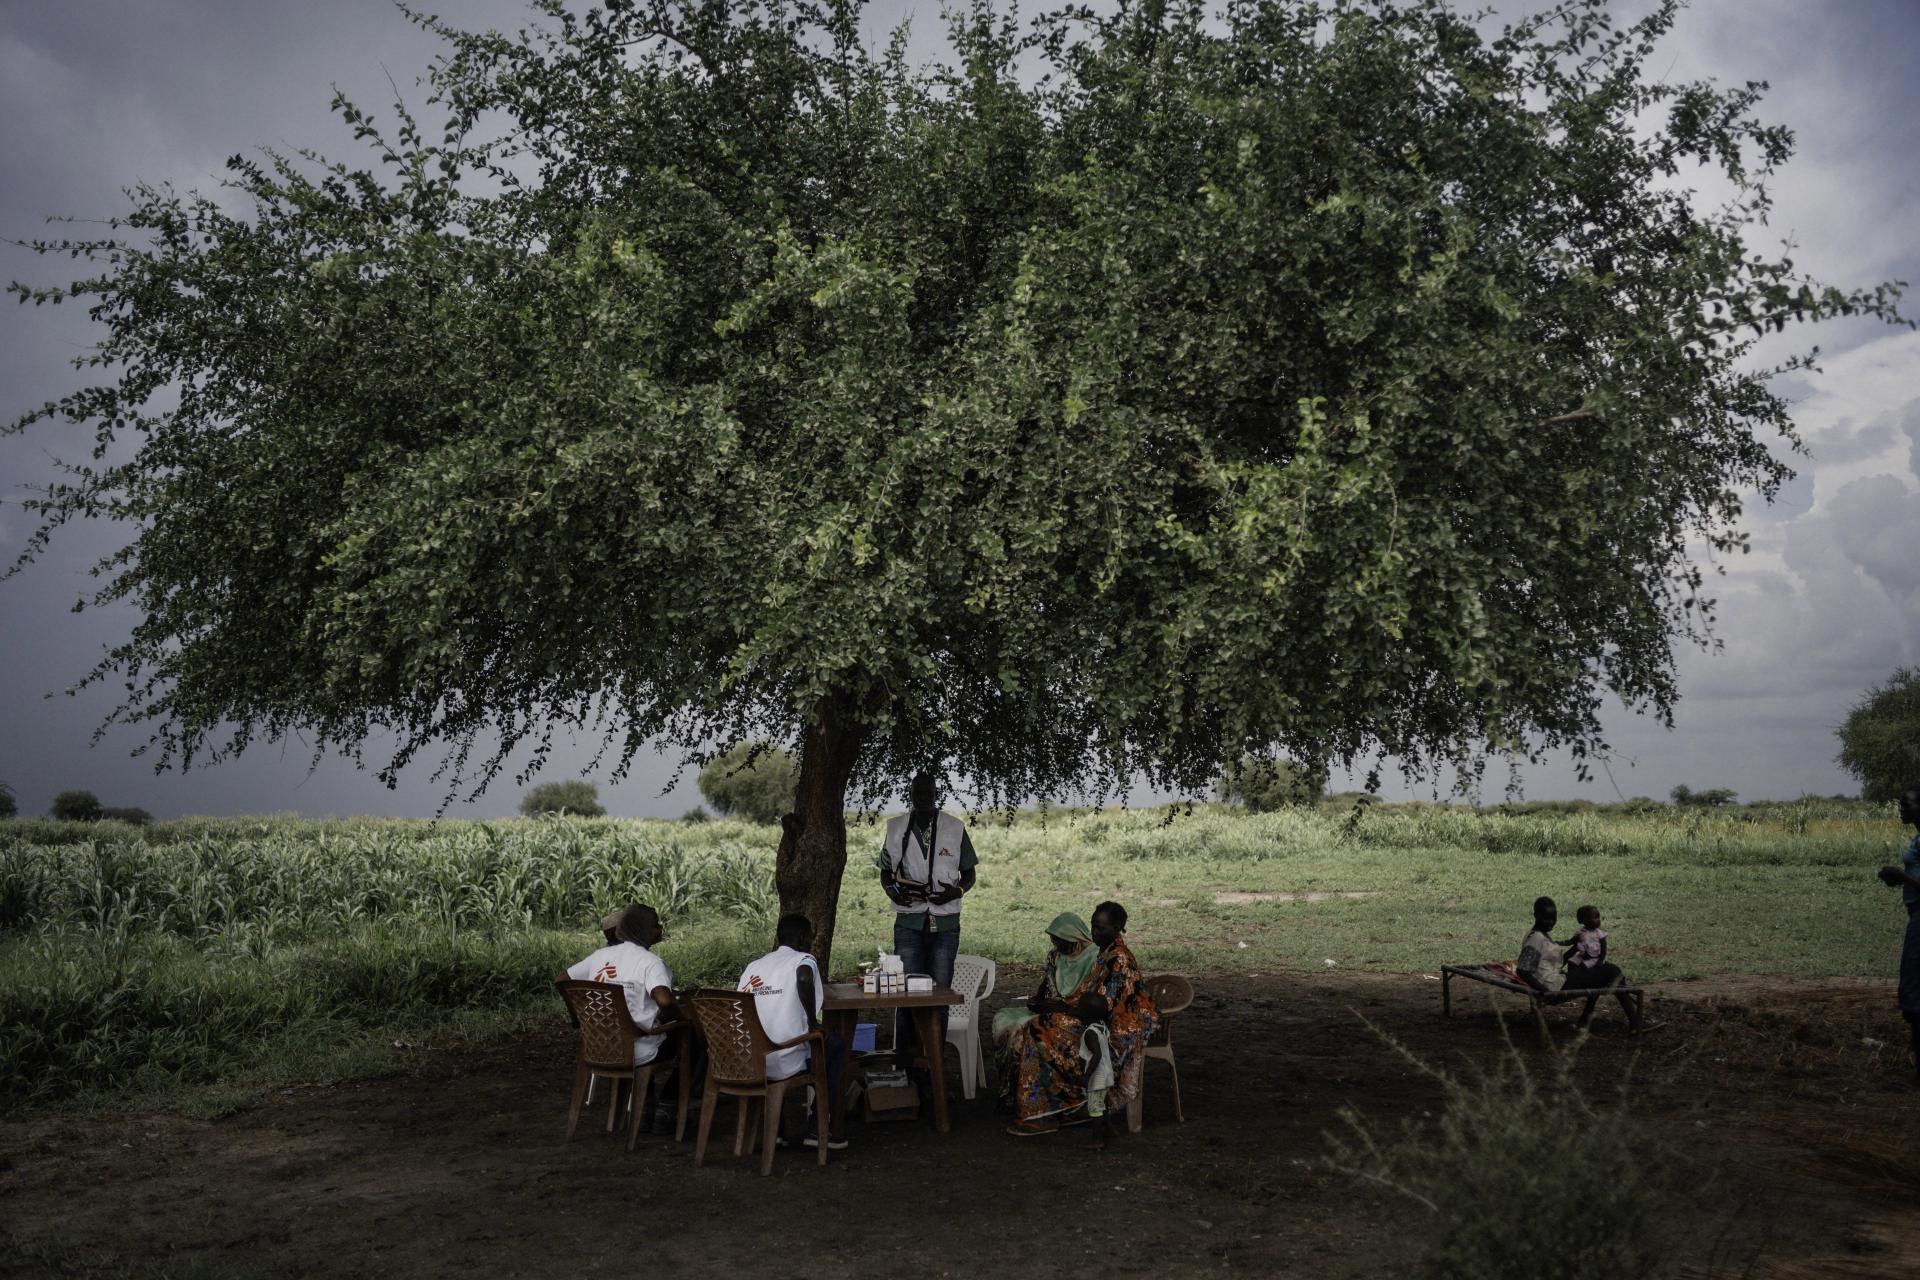 MSF team provides medical consultations to people at a temporary health post set up under a tree in Khadian, Abyei 